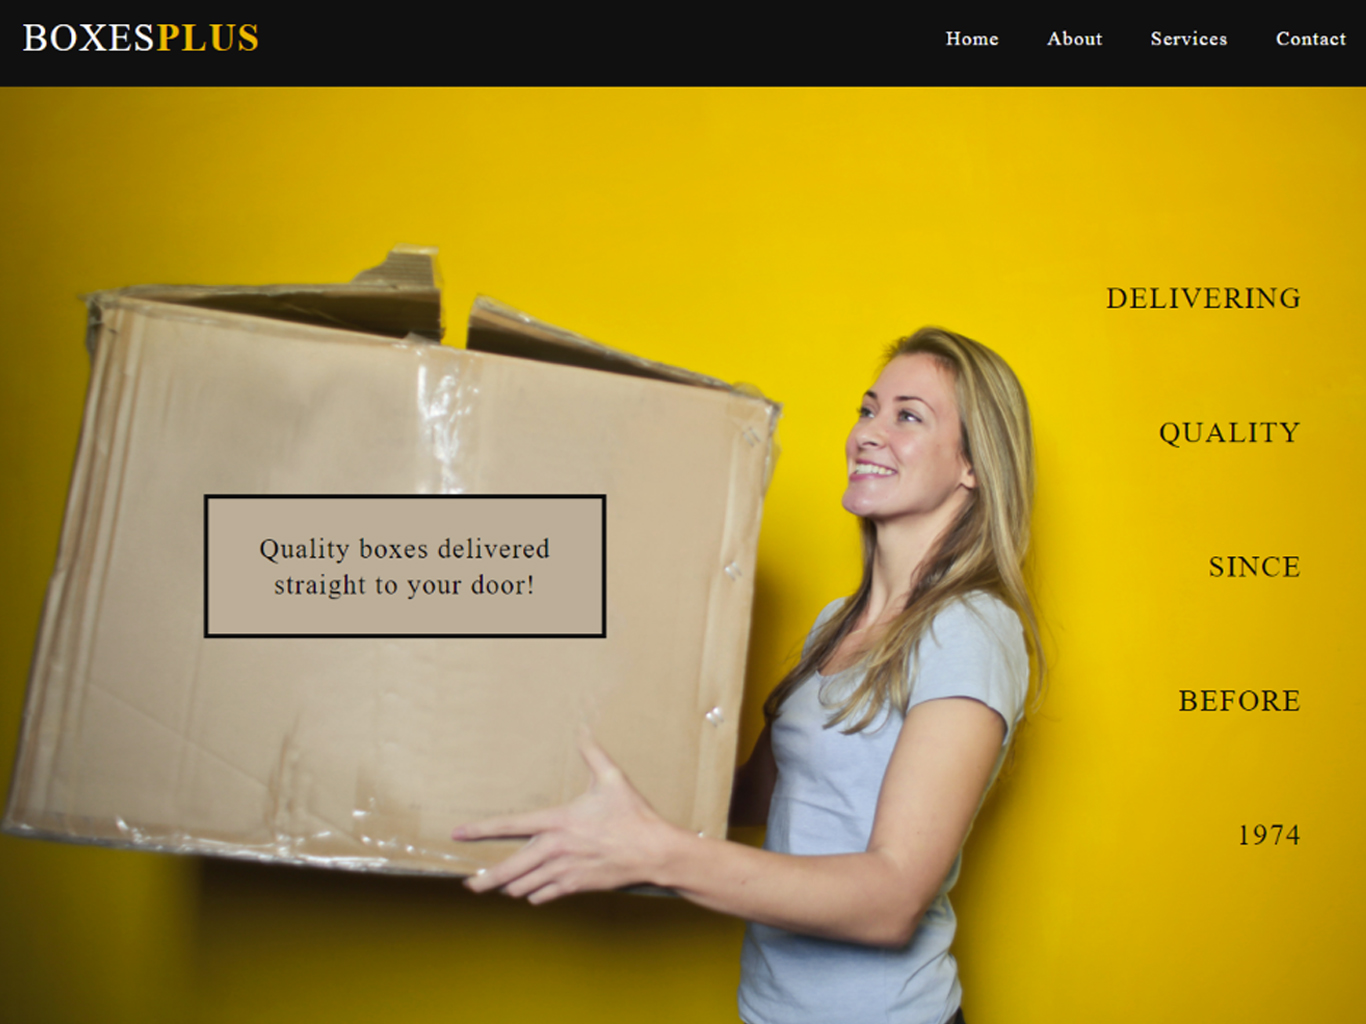 A webpage display for a fictional delivery Services company called Boxes Plus; there is a woman smiling while holding a large cardboard box.